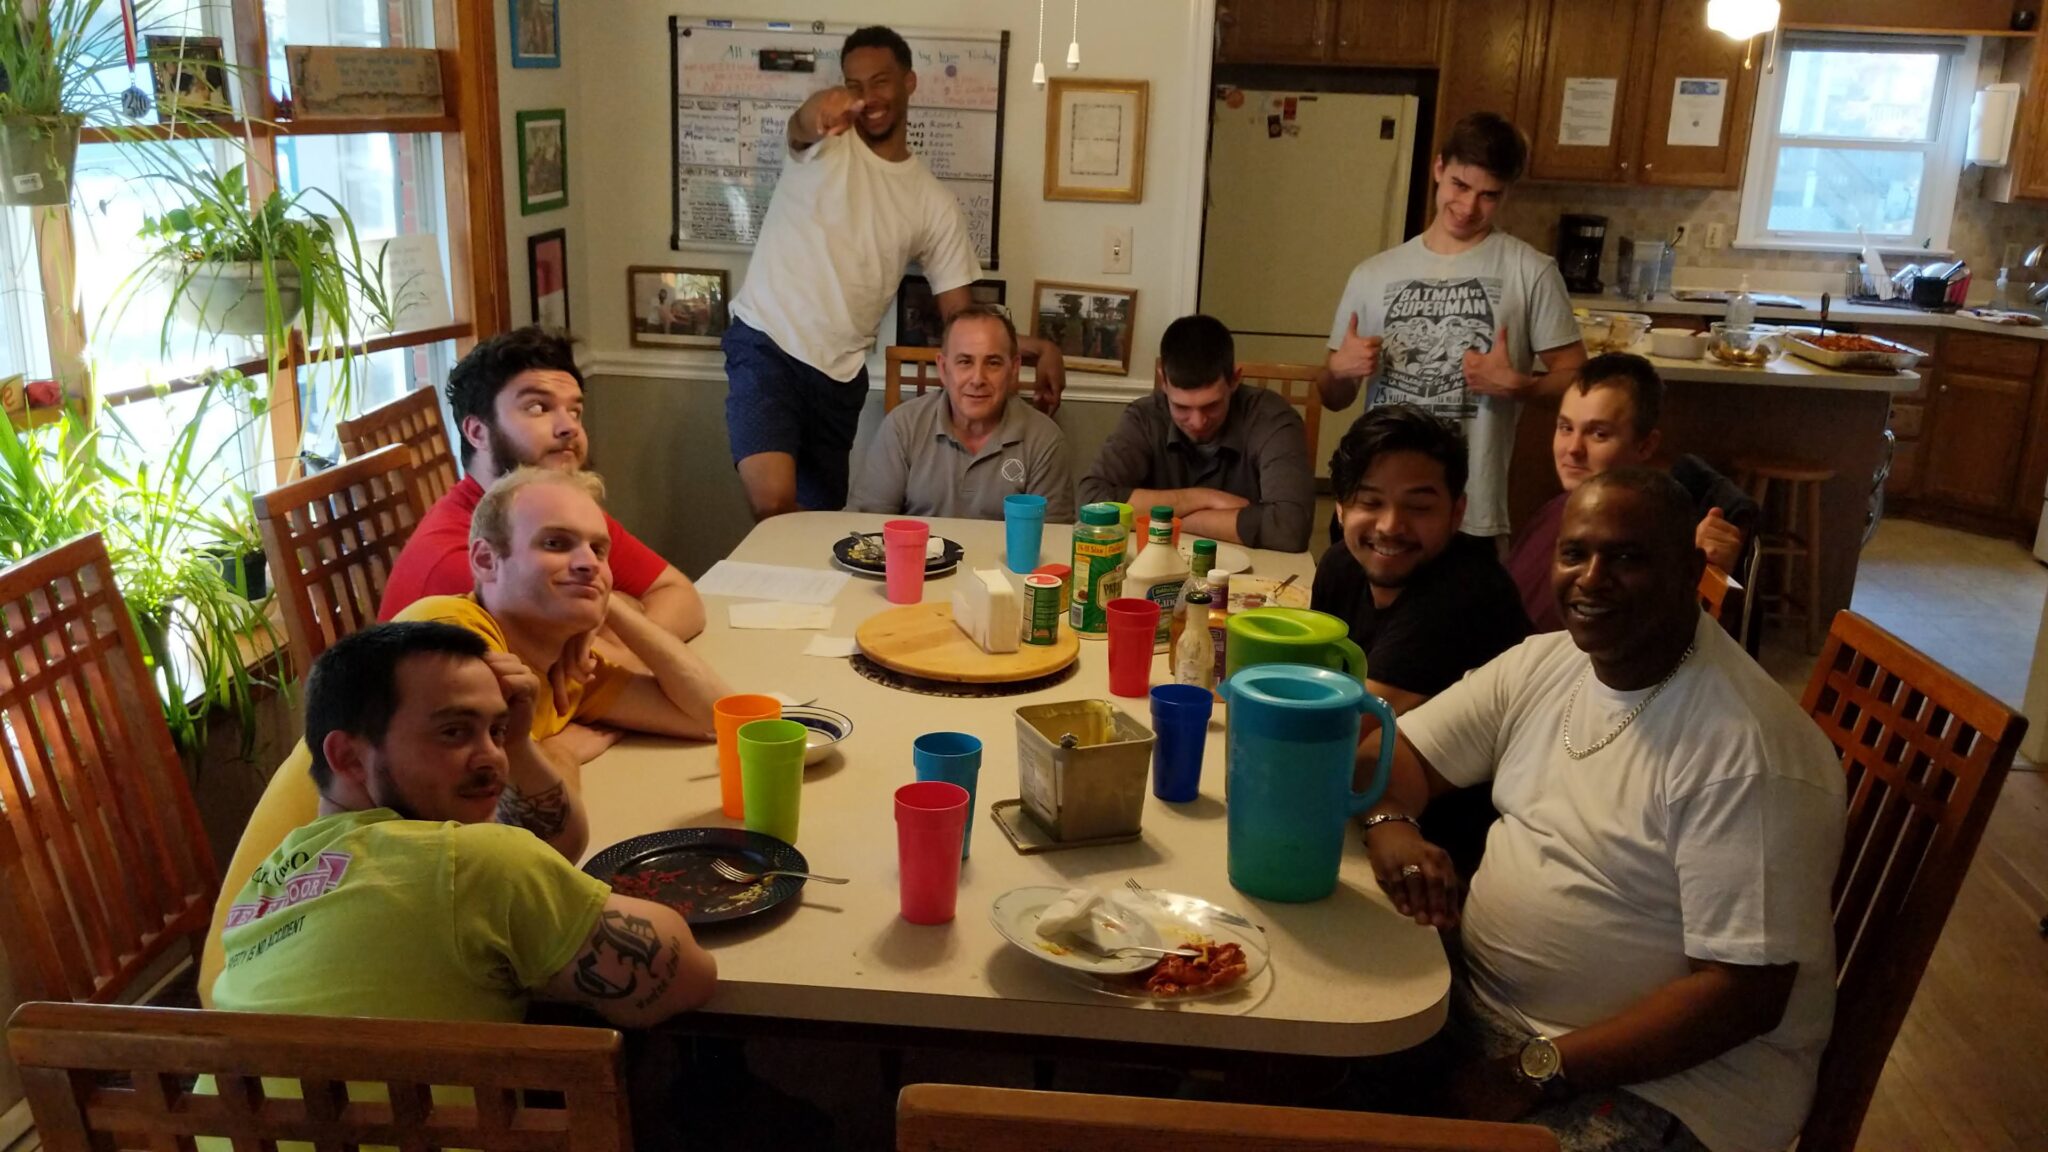 A group of ten men gather around a dining table of a home after sharing a meal, most are seated and smiling and others are standing and posing for the photo